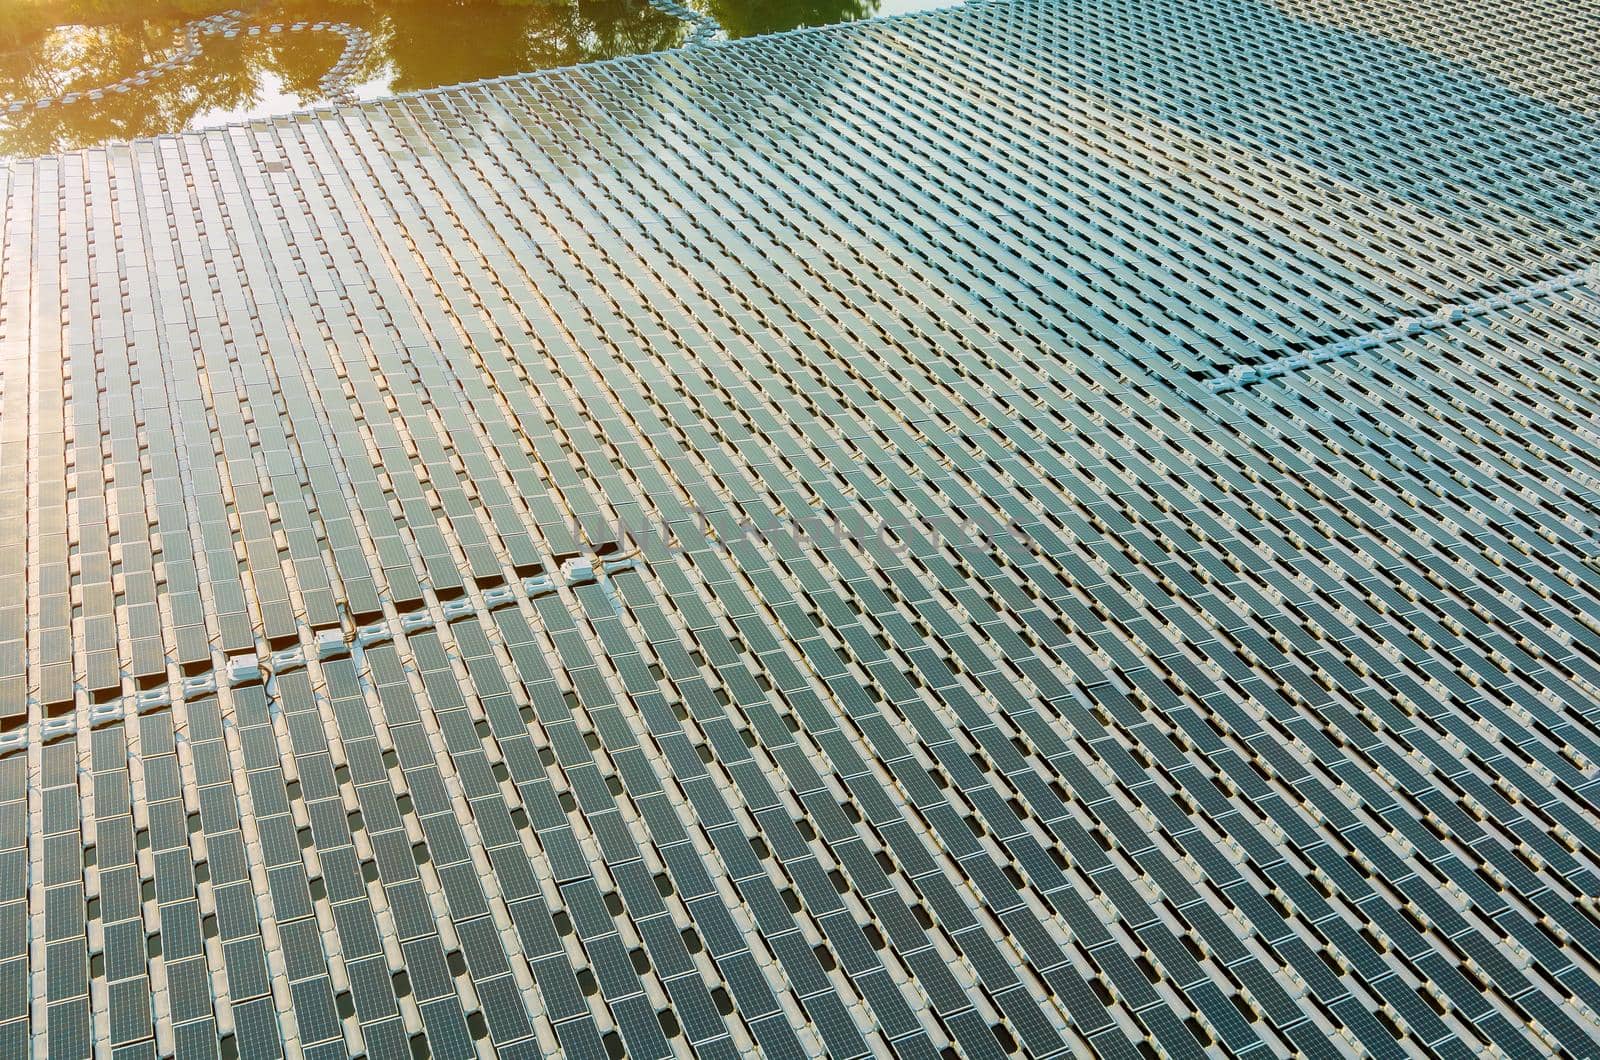 Aerial top view of solar panels cells on floating in pond with water the power plant renewable energy eco technology electric power industry